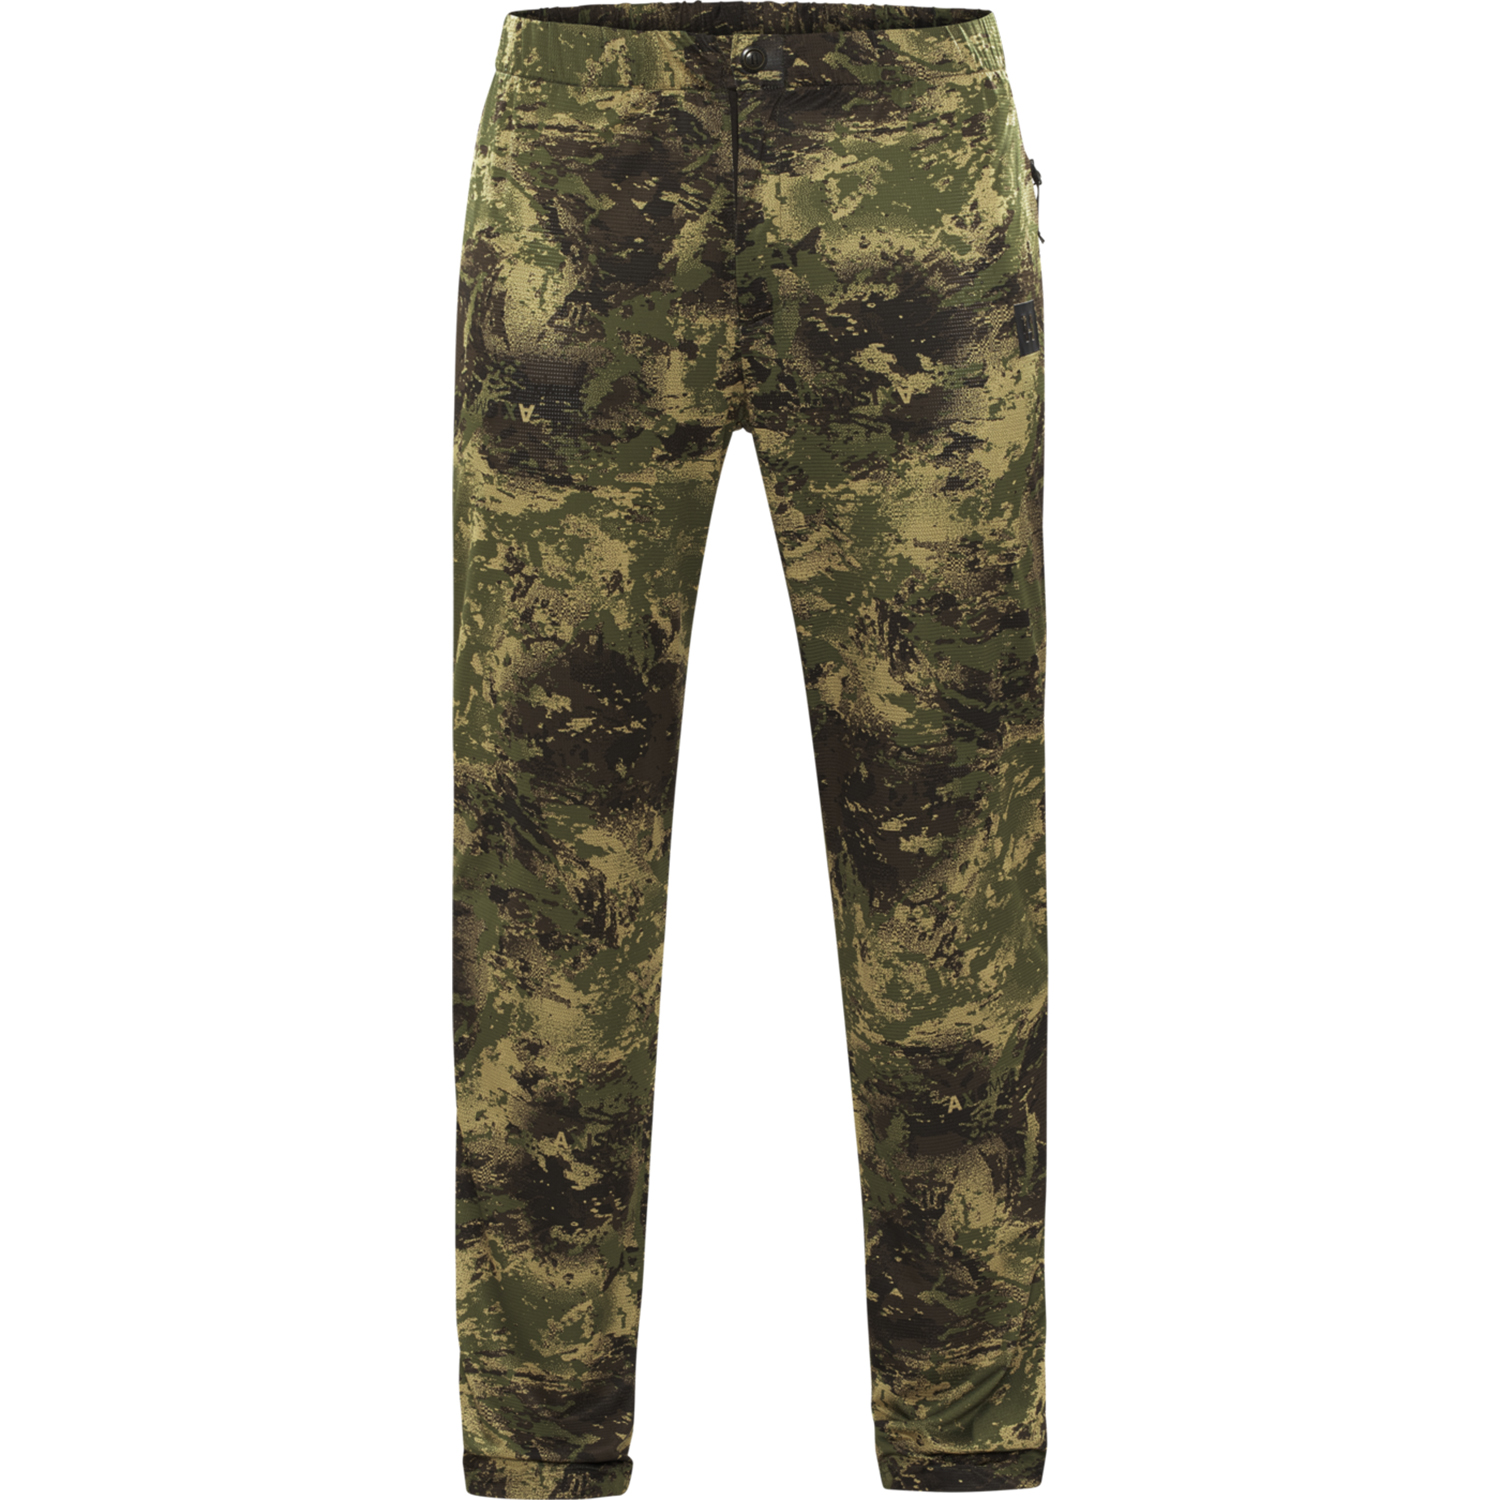 Härkila cover trousers deer stalker (AXIS MSP) - Hunting Trousers